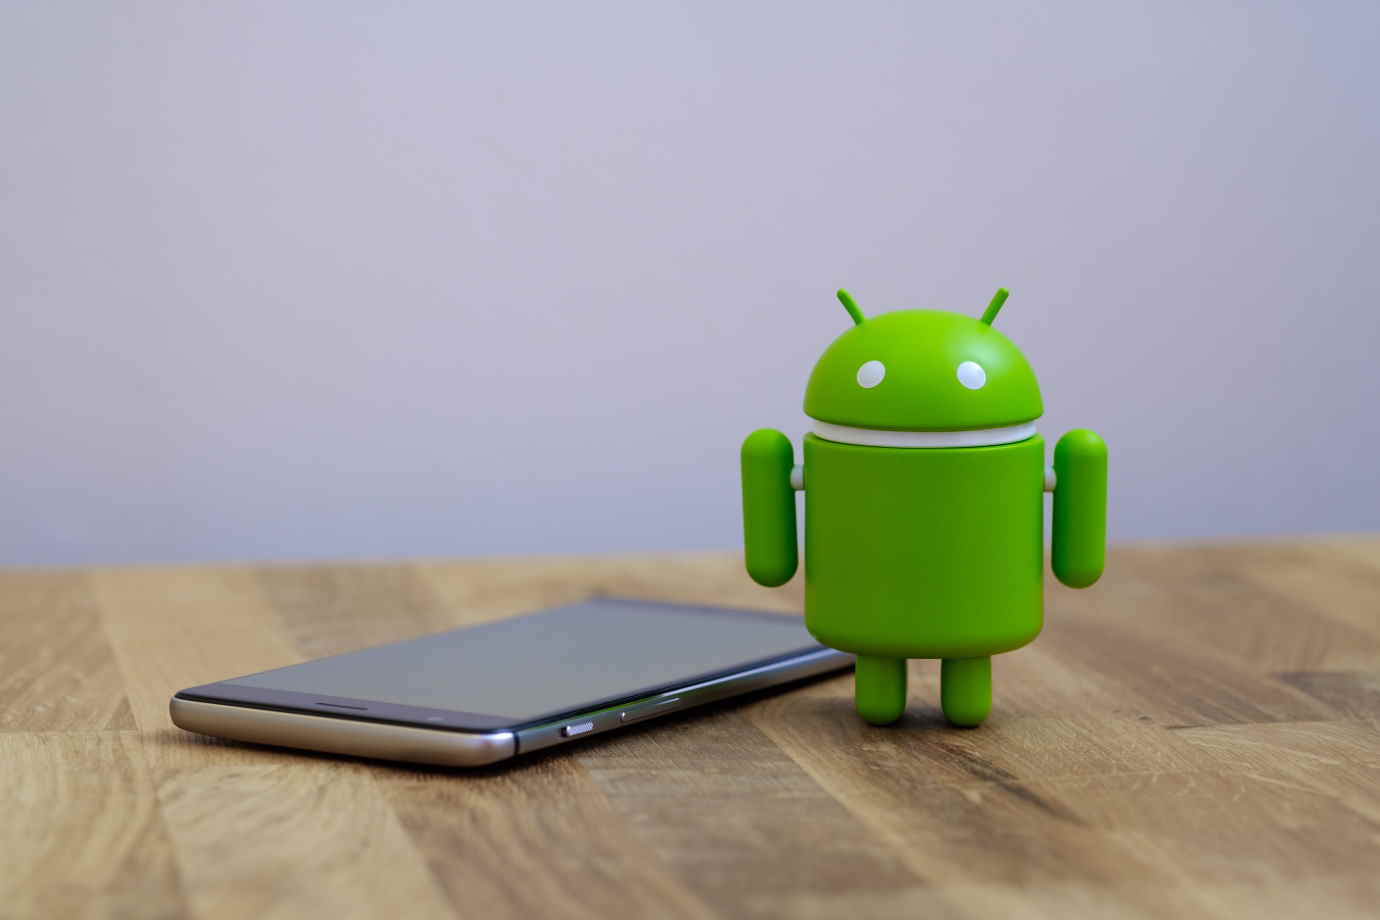 Android © quietbits / Shutterstock.com